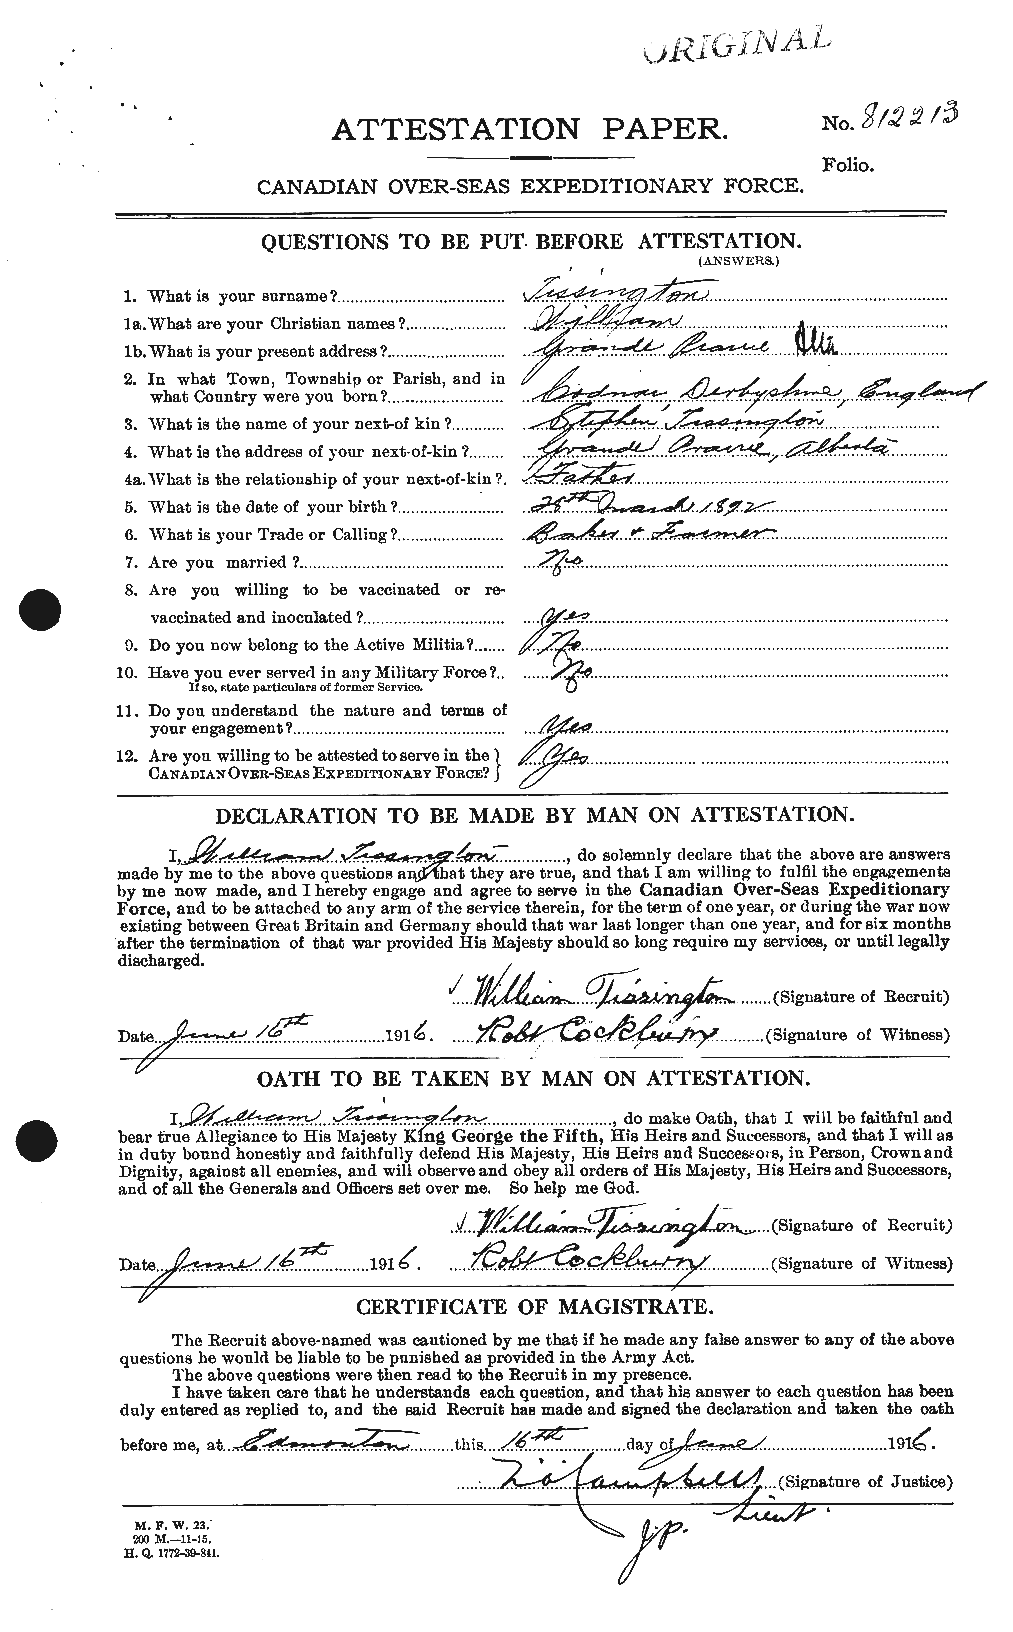 Personnel Records of the First World War - CEF 634866a